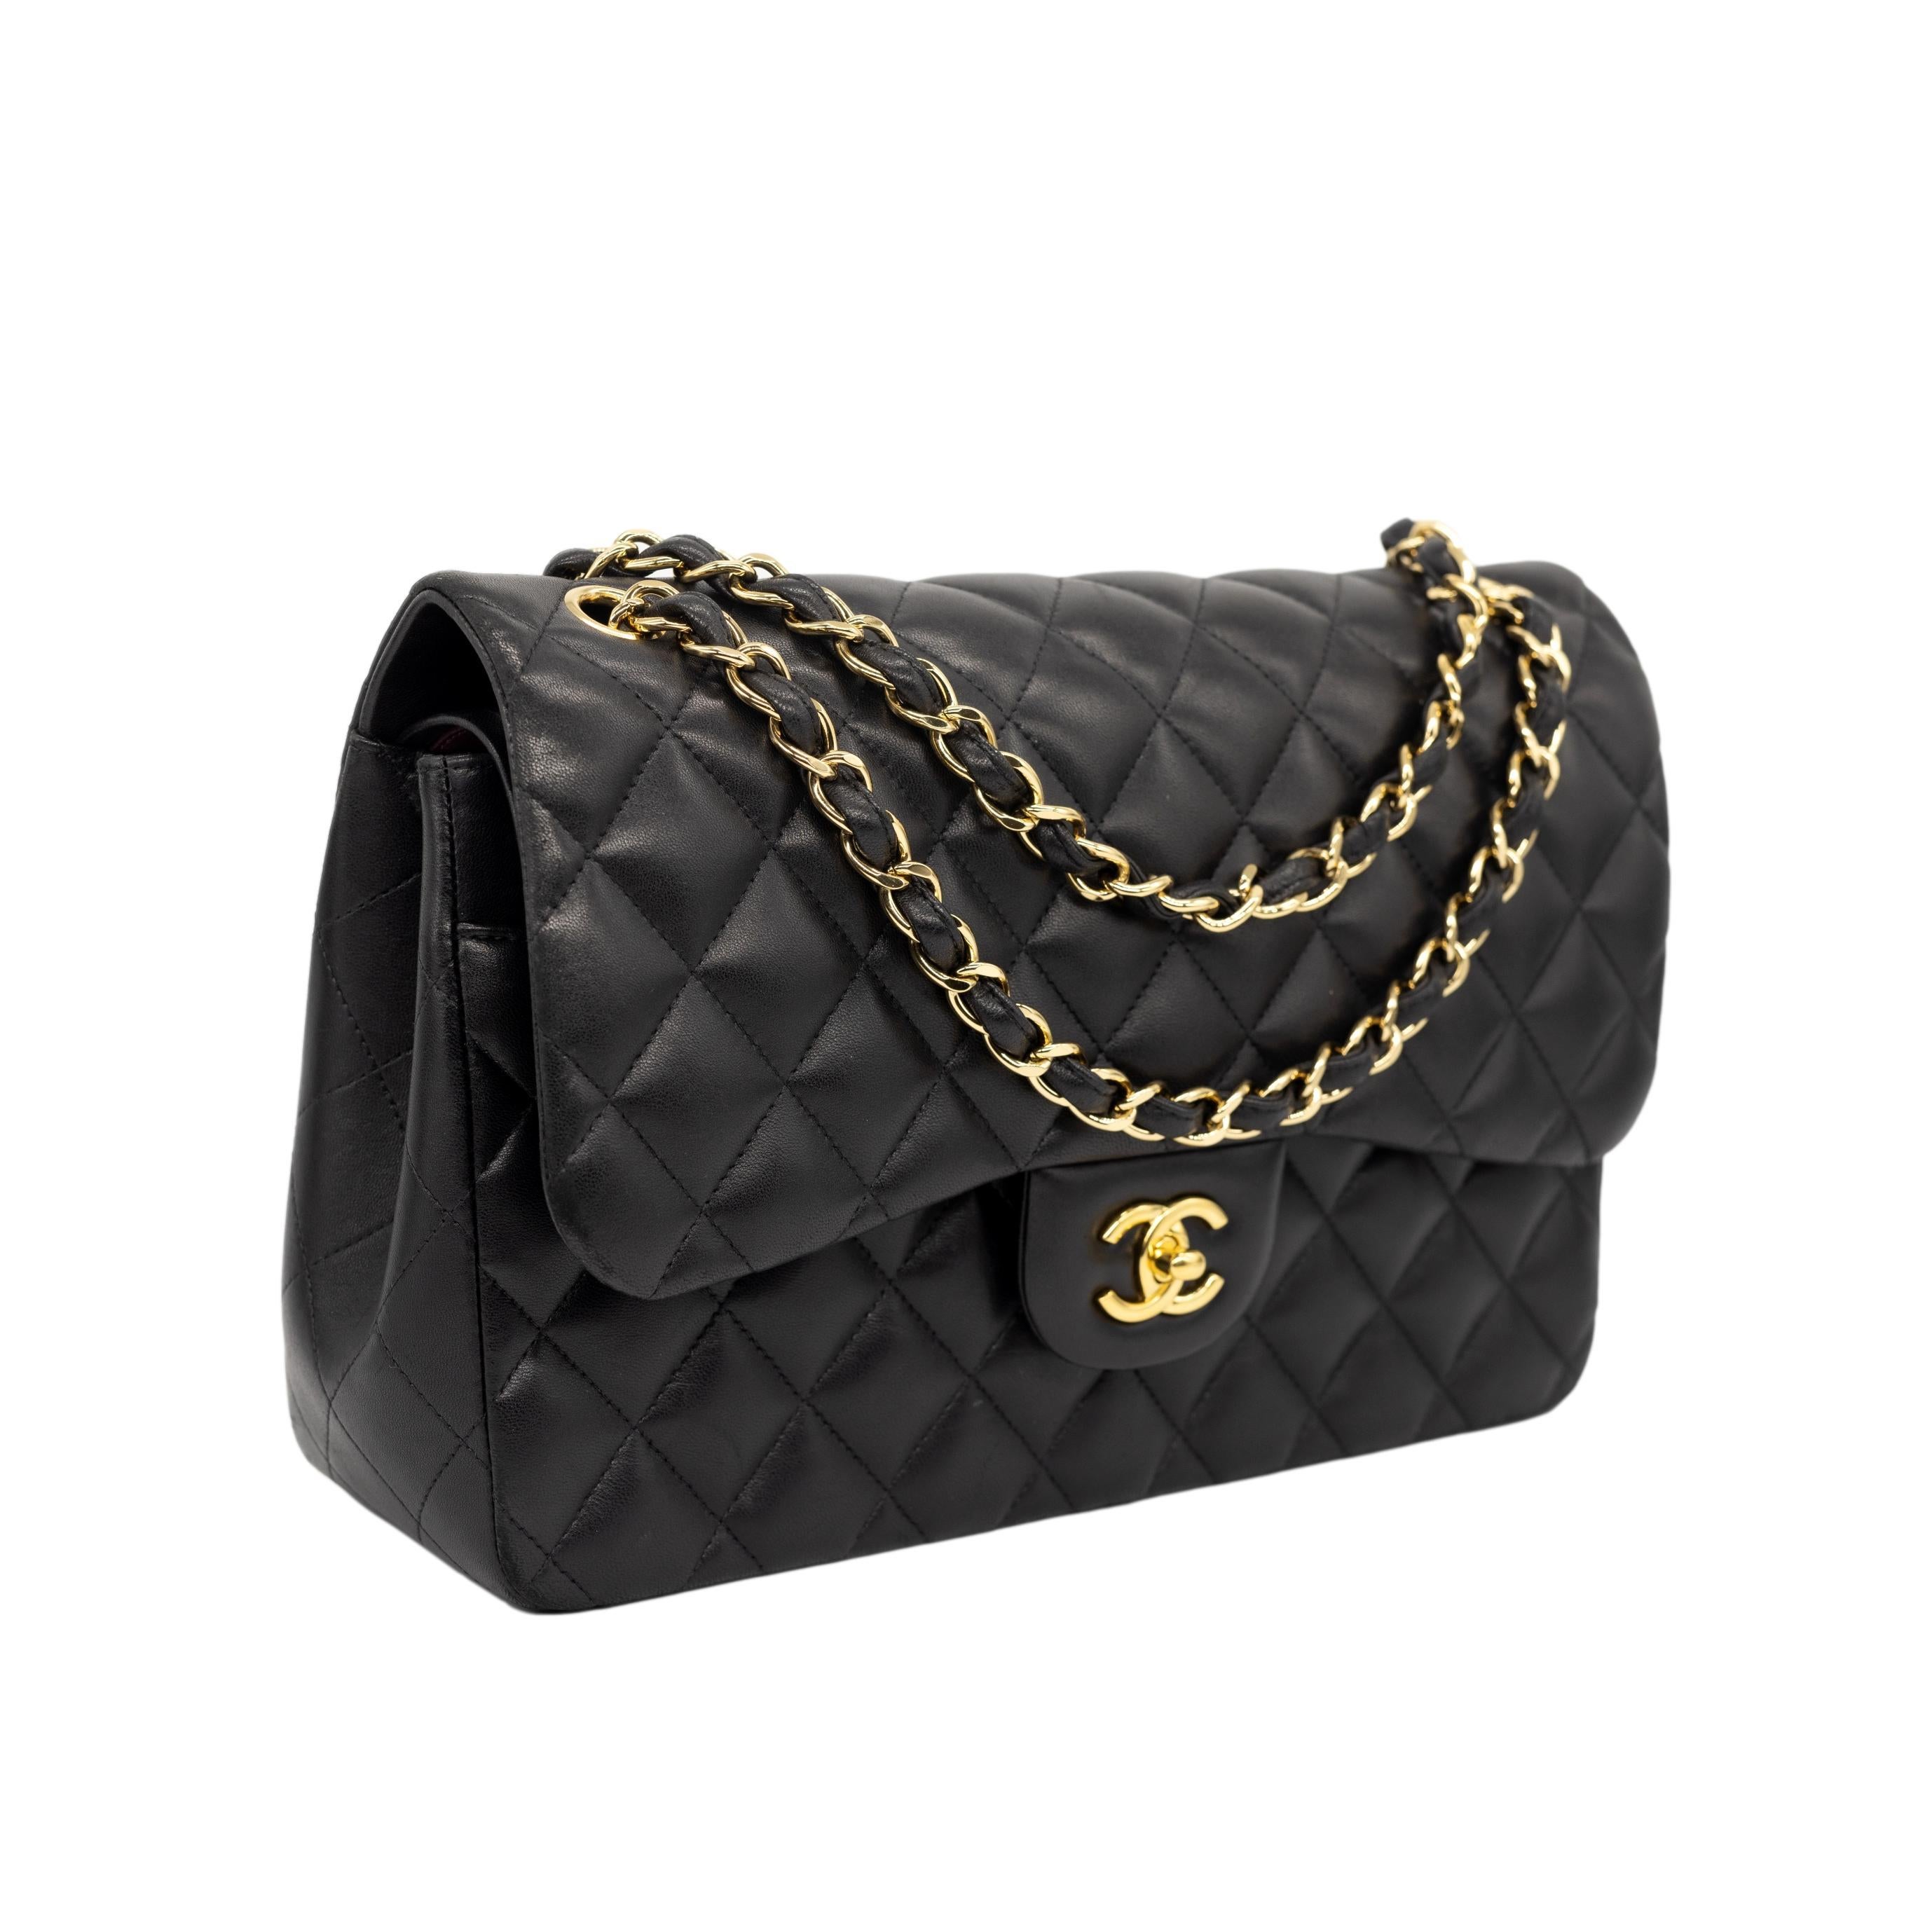 Chanel Timeless Black Jumbo Double Flap Quilted Lambskin Shoulder Bag, 2014. The iconic Chanel bag was originally issued by Coco Chanel in February 1955 which became the very first socially acceptable shoulder bag for the modern day woman of